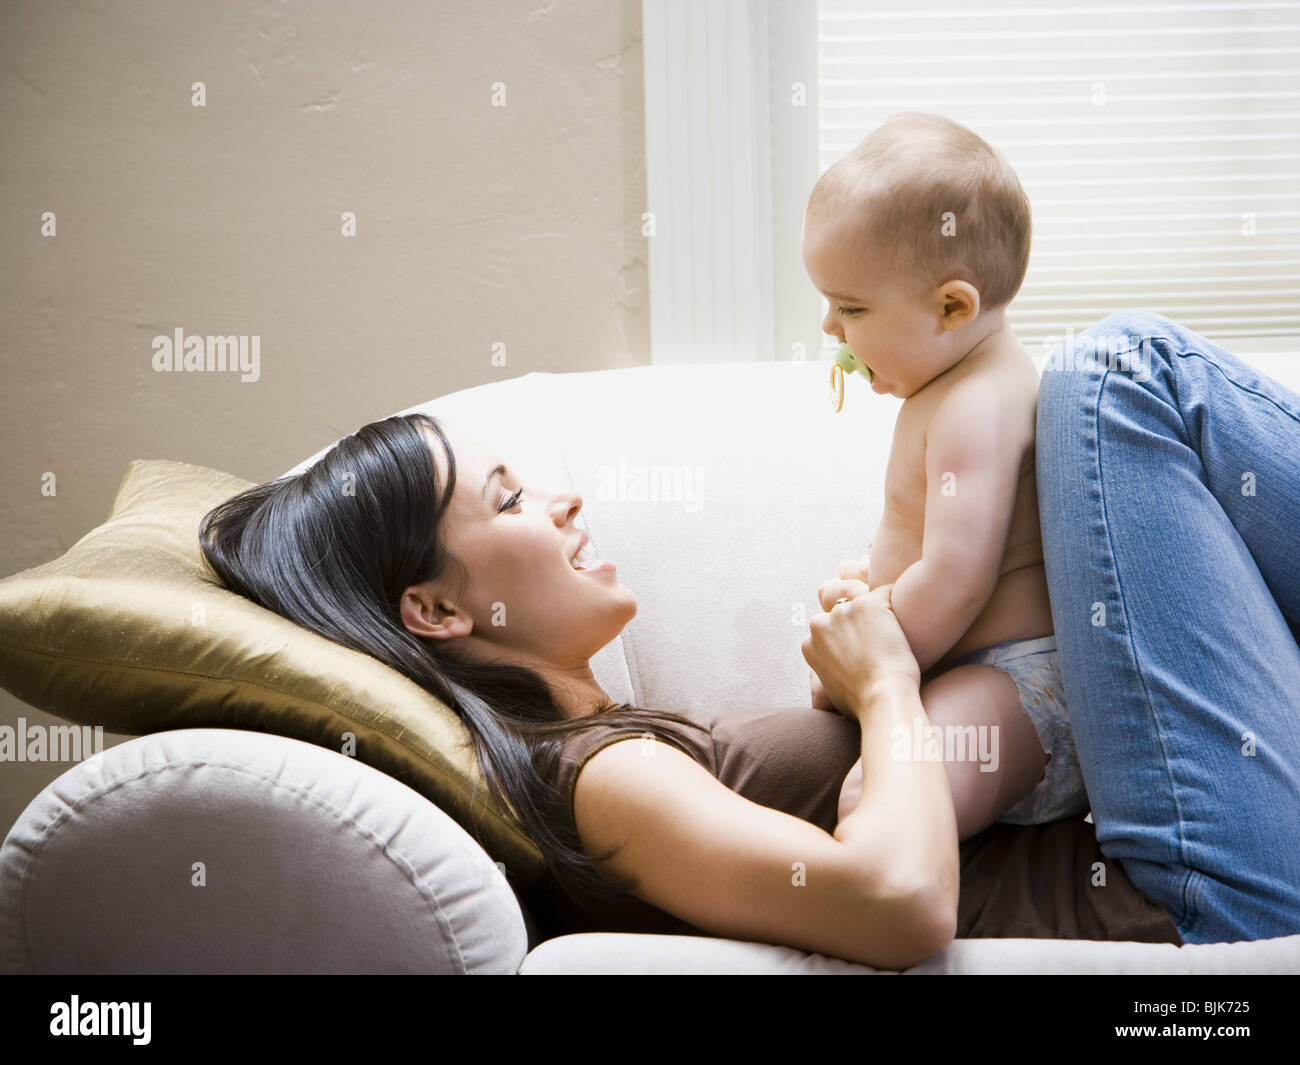 Woman lying down on sofa with baby Stock Photo